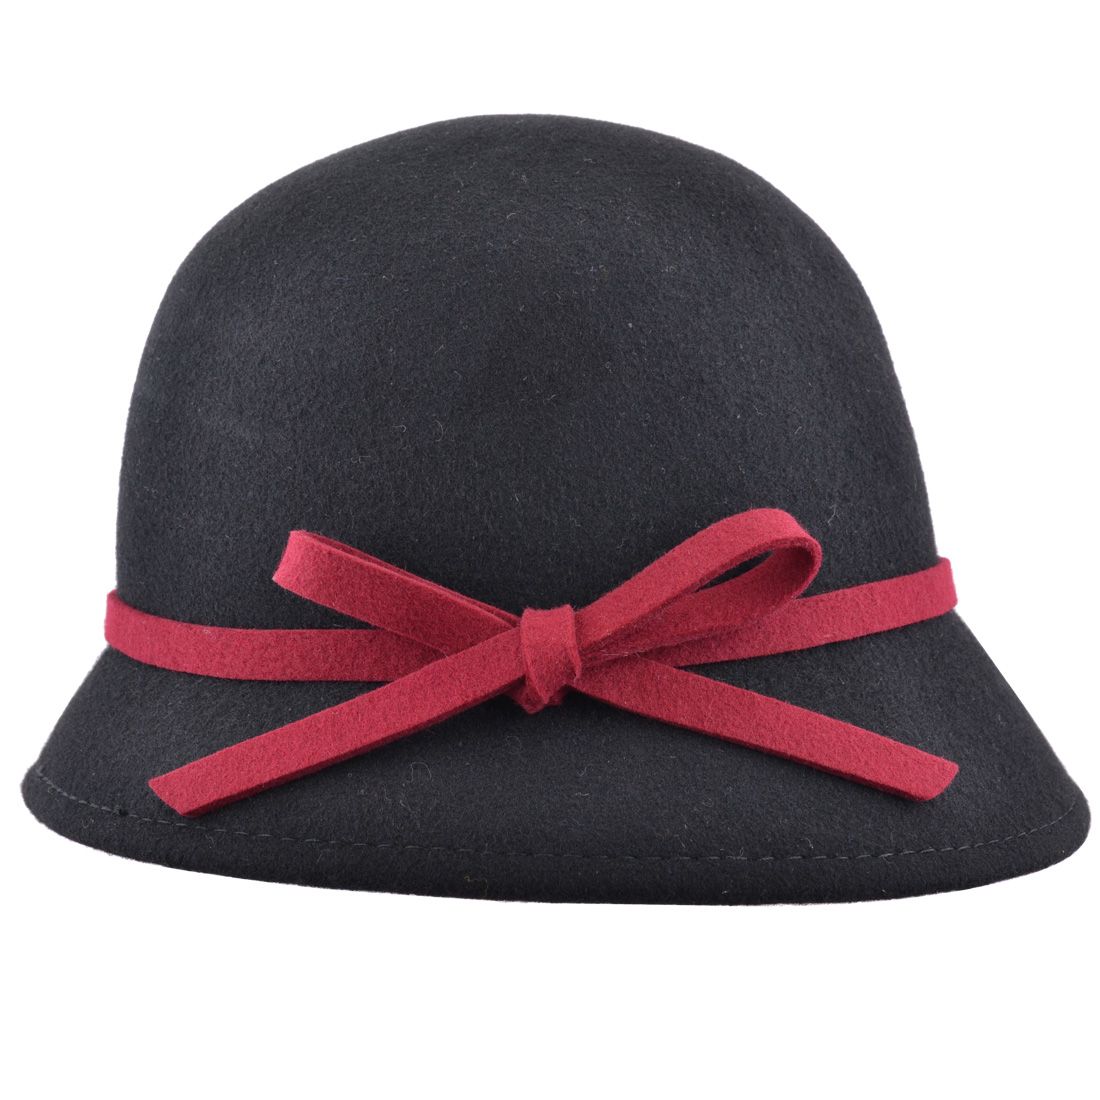 Wool Felt Cloche Hat With Bow